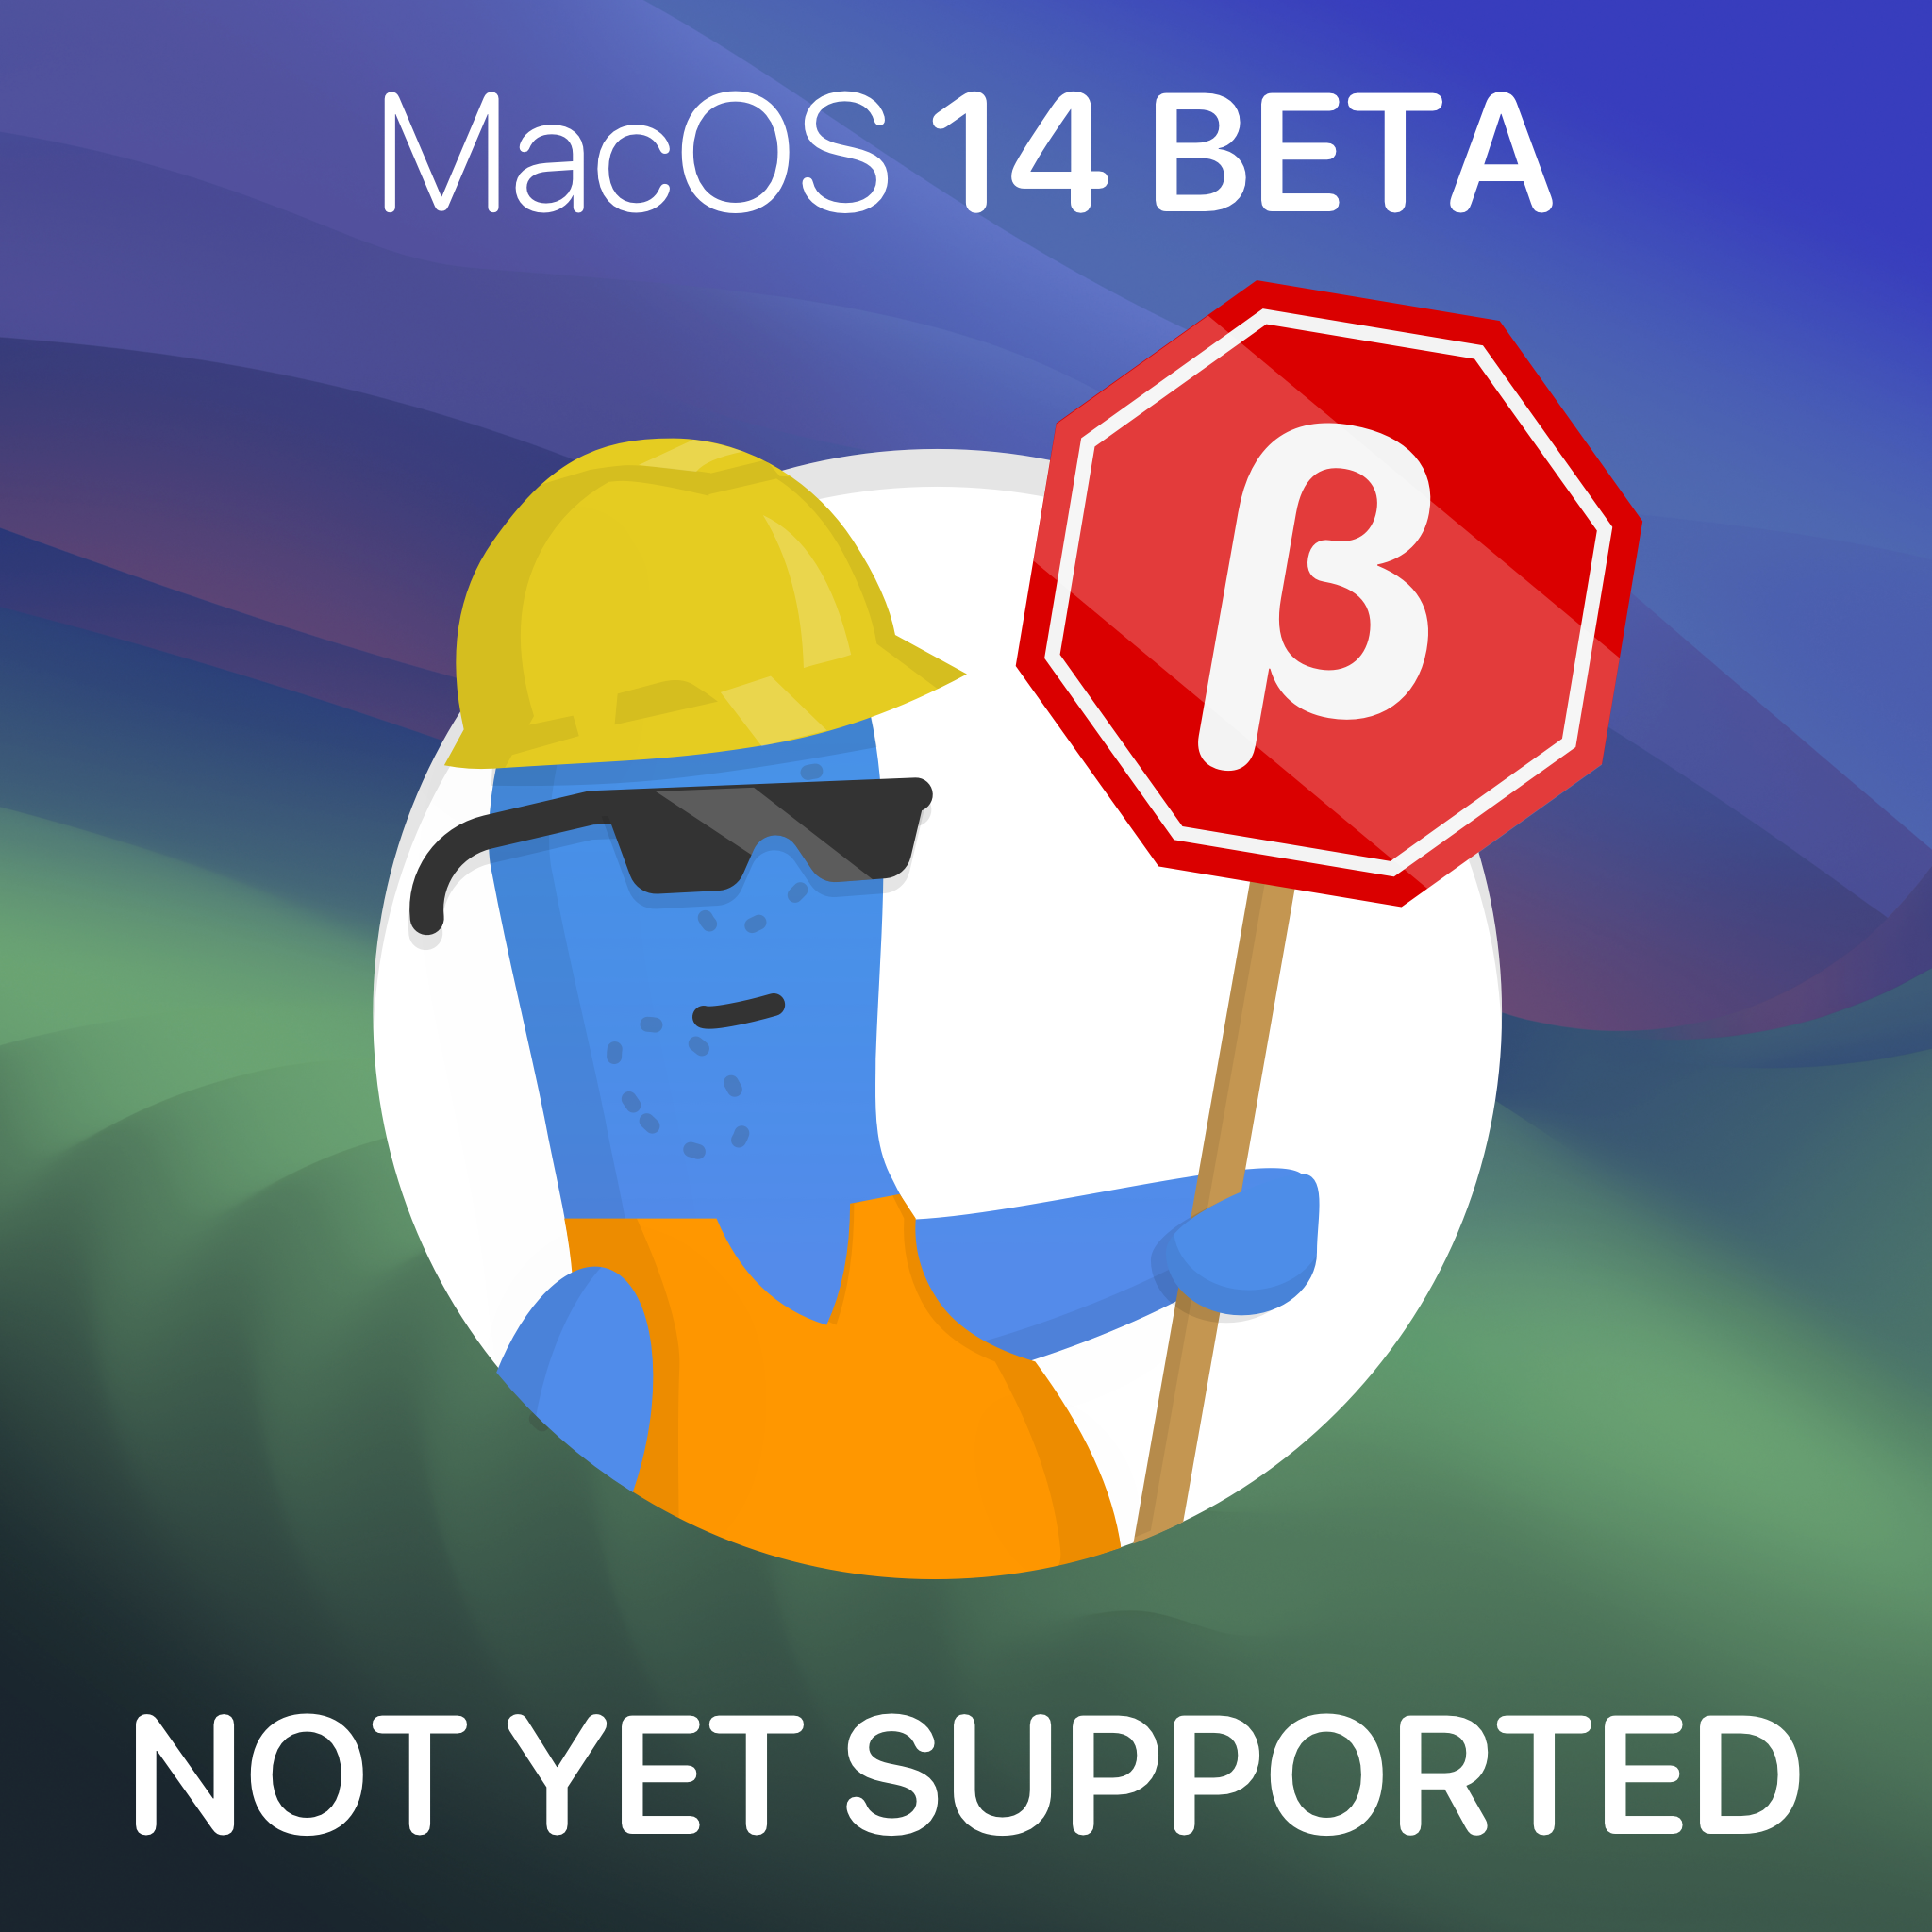 Image text reads “MacOS 14 Beta Not Yet Supported”, with a stop sign